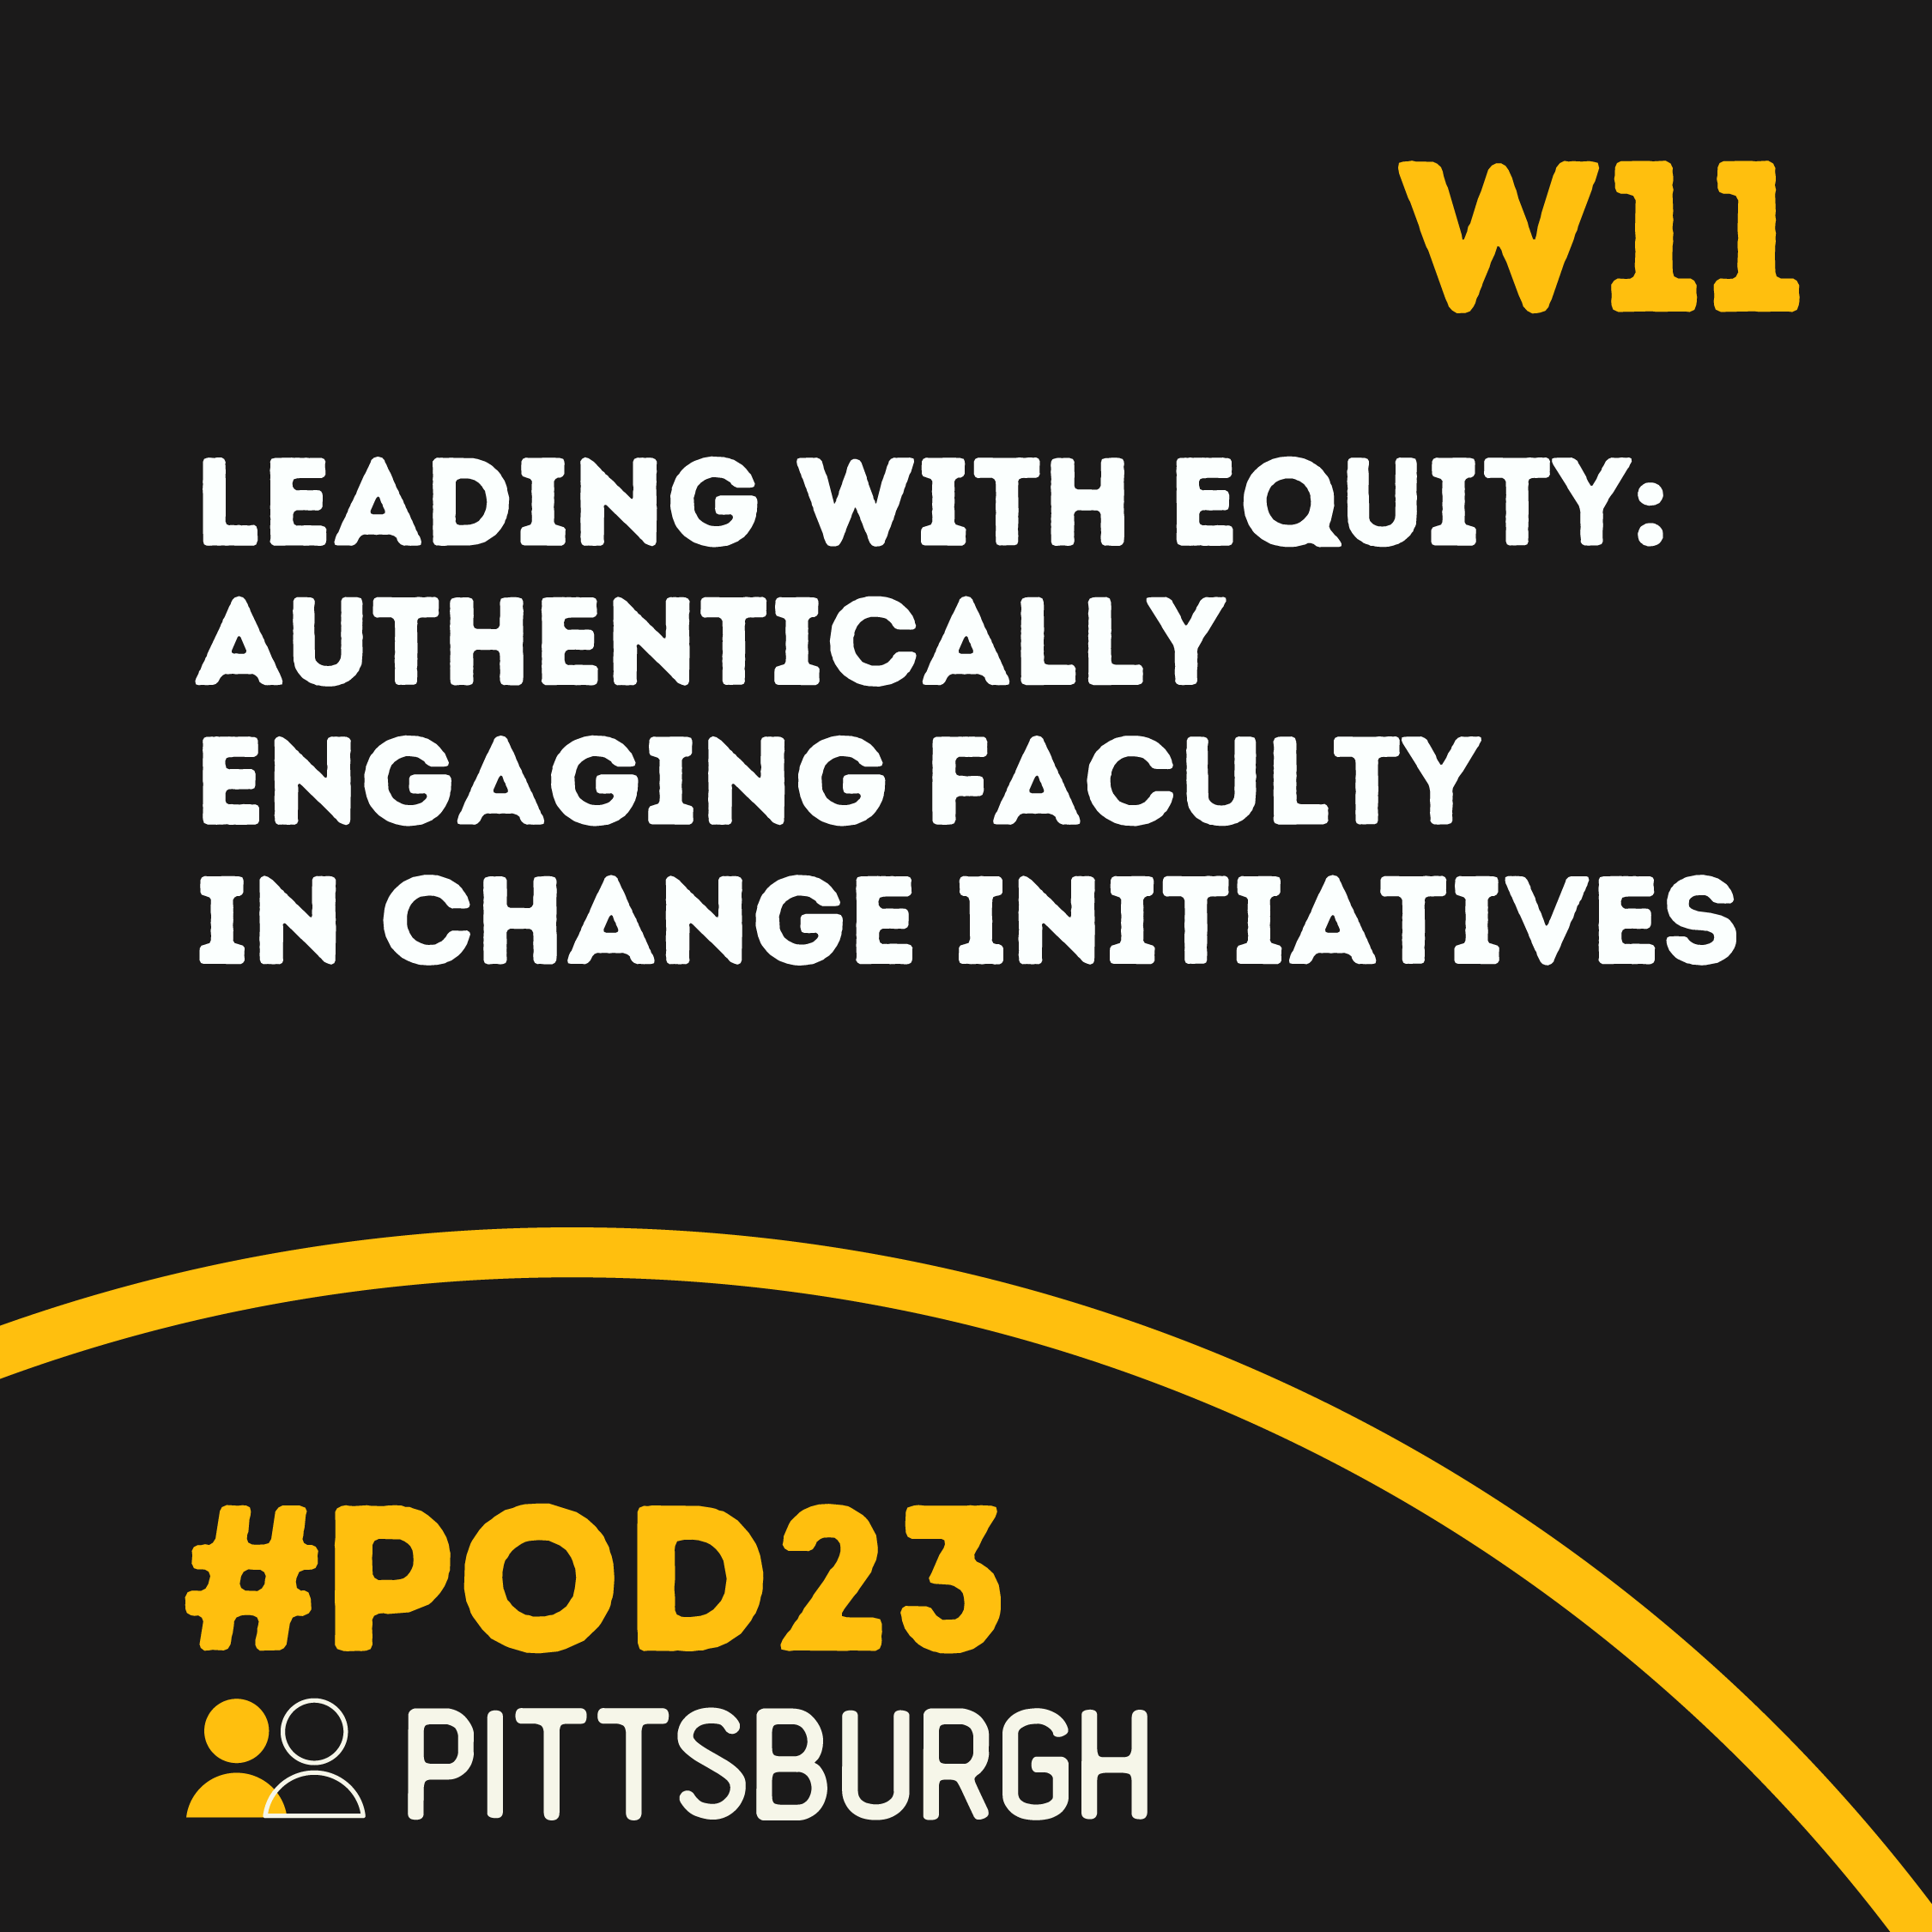 #POD23 W11: Leading with Equity: Authentically Engaging Faculty in Change Initiatives